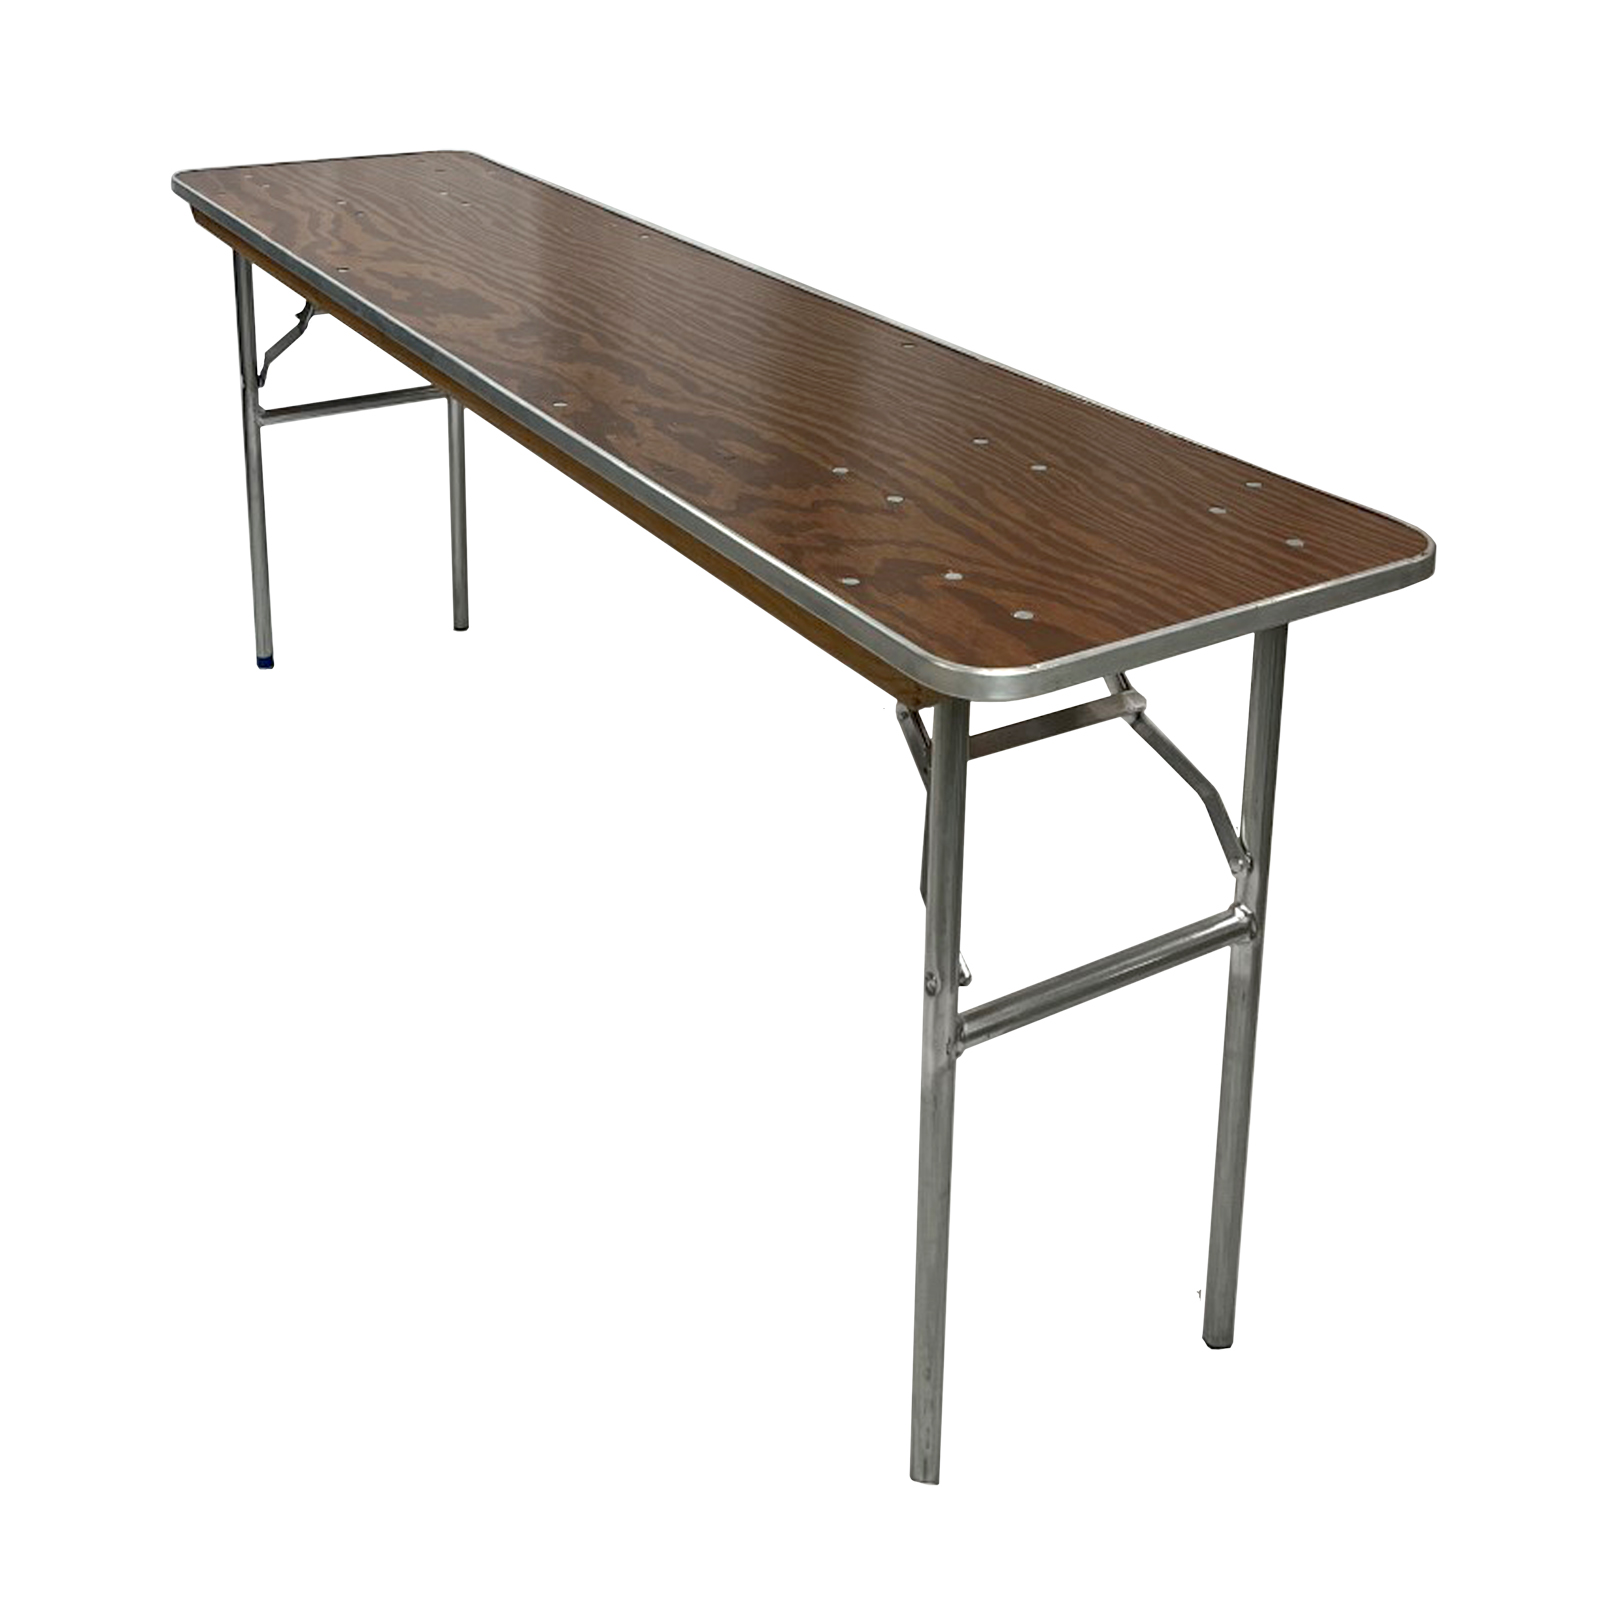 Table 6'x18" Conference Wood Topped